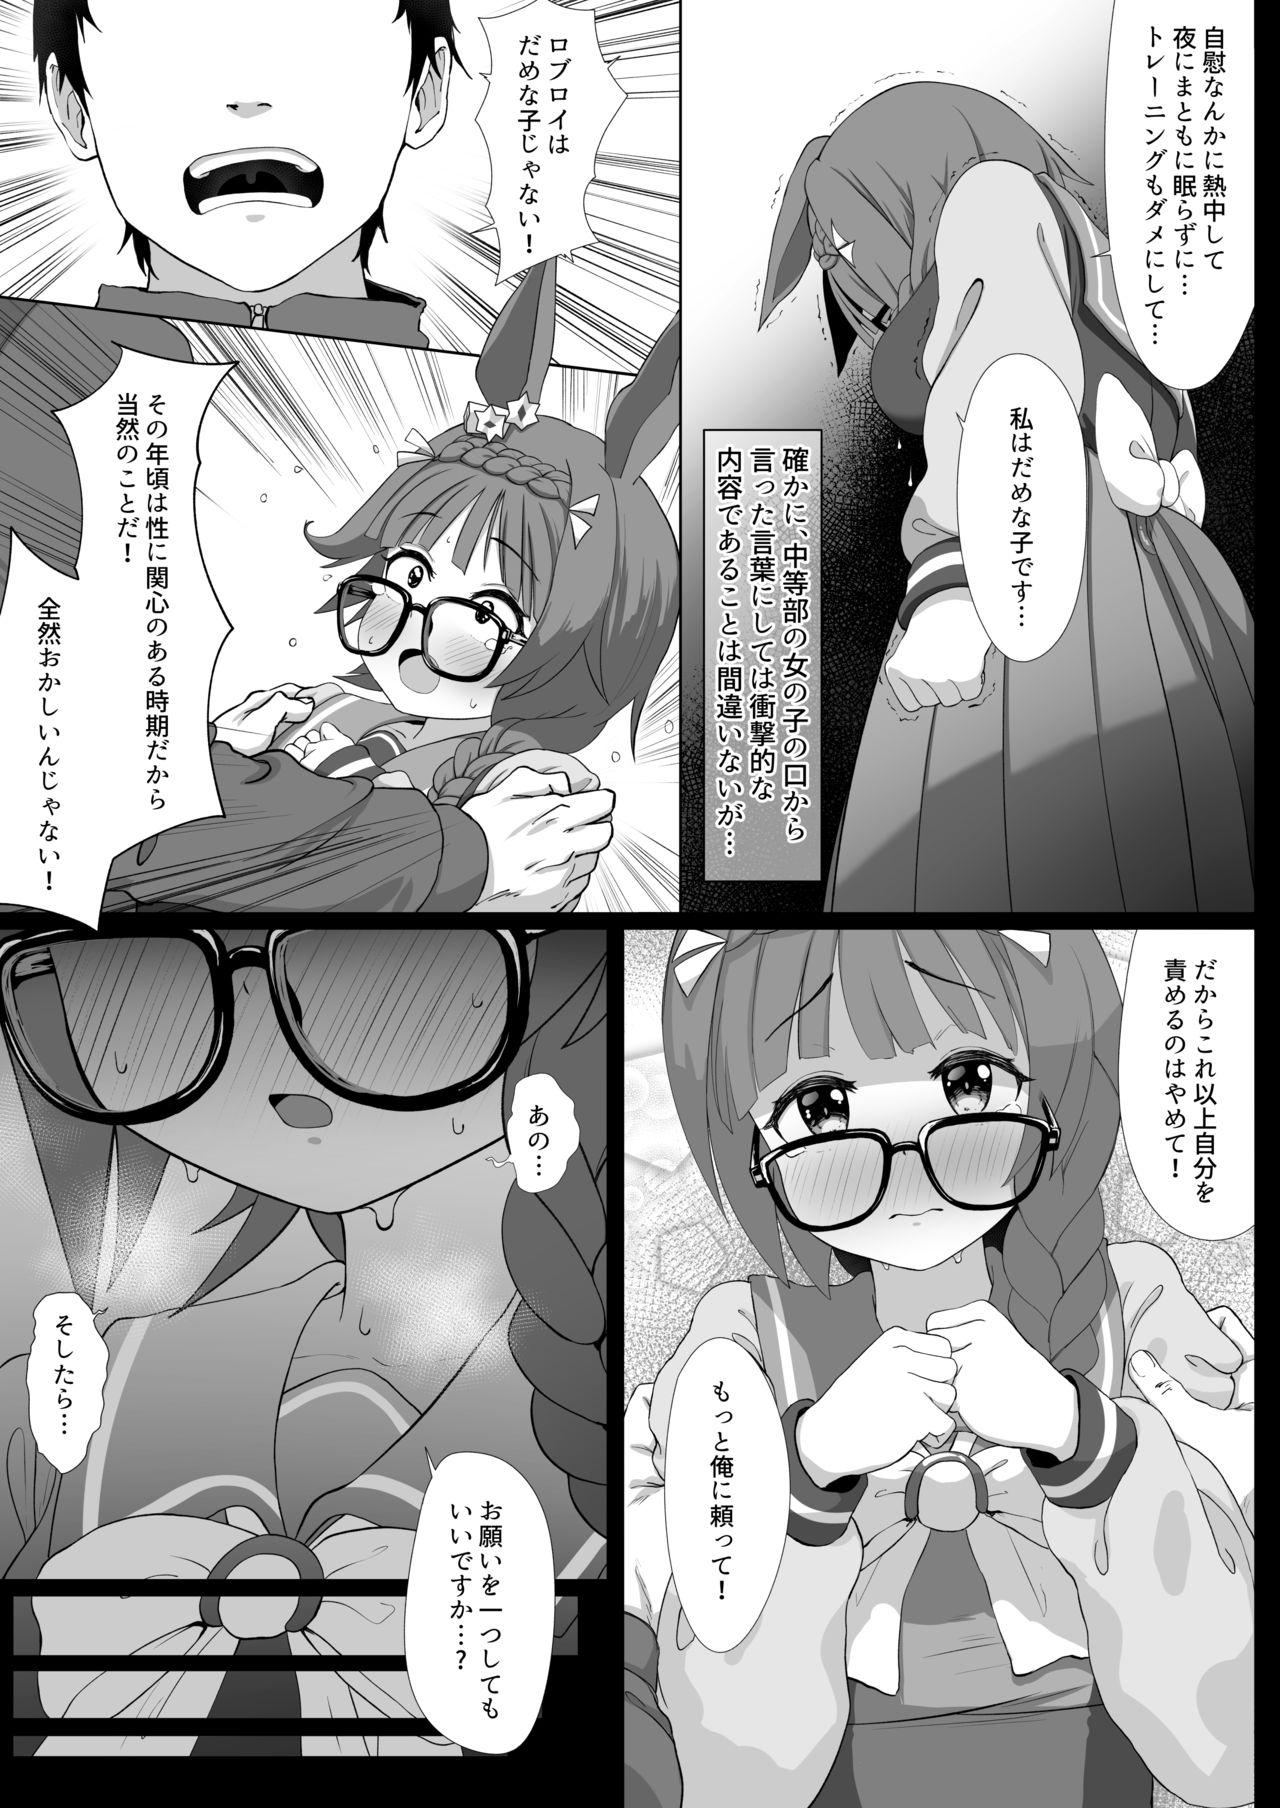 Gaystraight Rob Roy - Uma musume pretty derby Young - Page 12